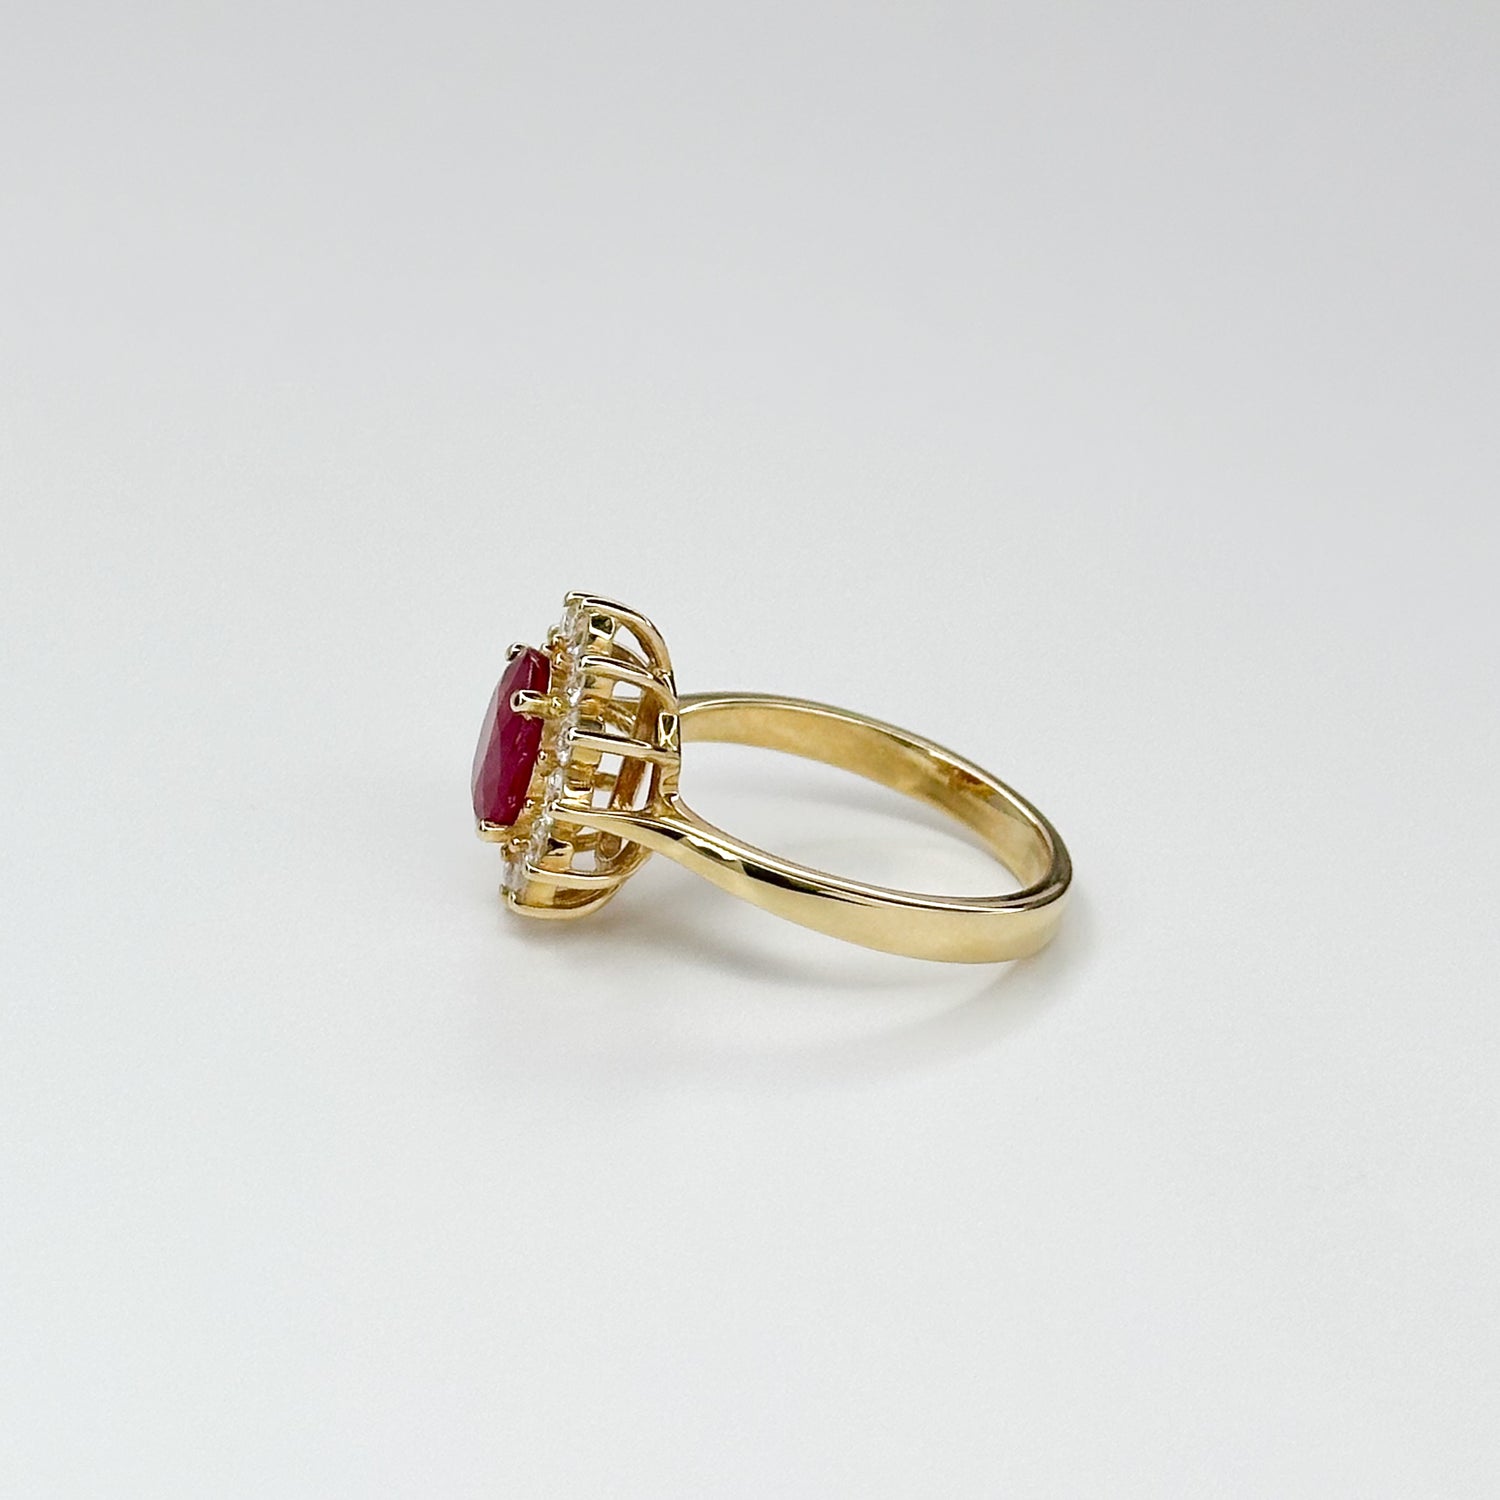 1.70ct Oval Cut Ruby Ring with Diamond Halo